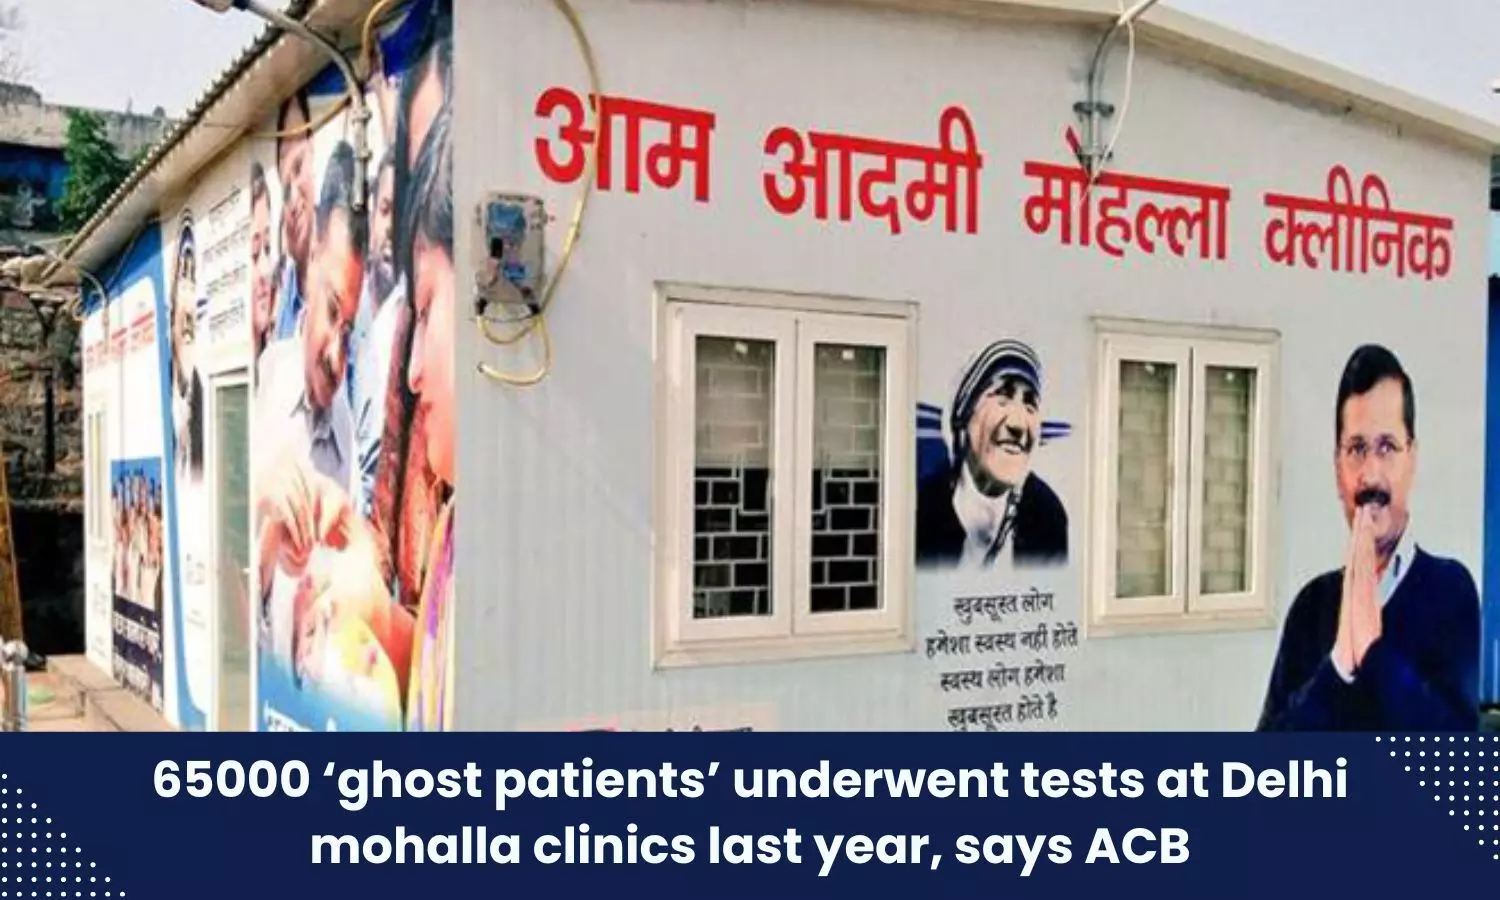 65000 ‘ghost patients’ underwent tests at mohalla clinics in Delhi last year, reveals ACB